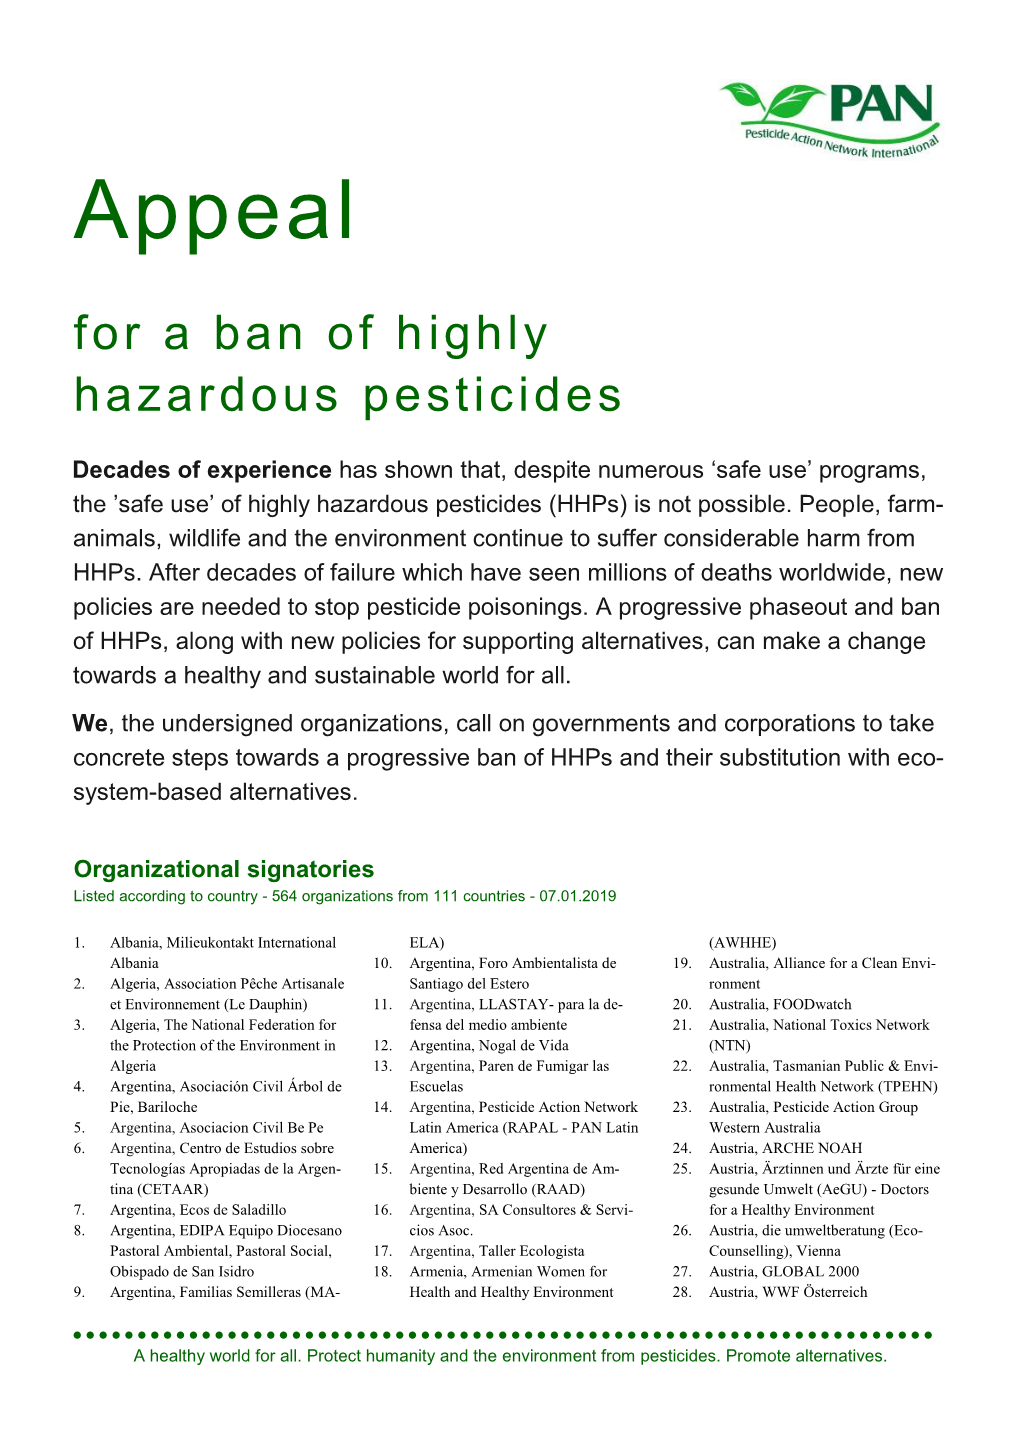 Appeal for a Ban of Highly Hazardous Pesticides